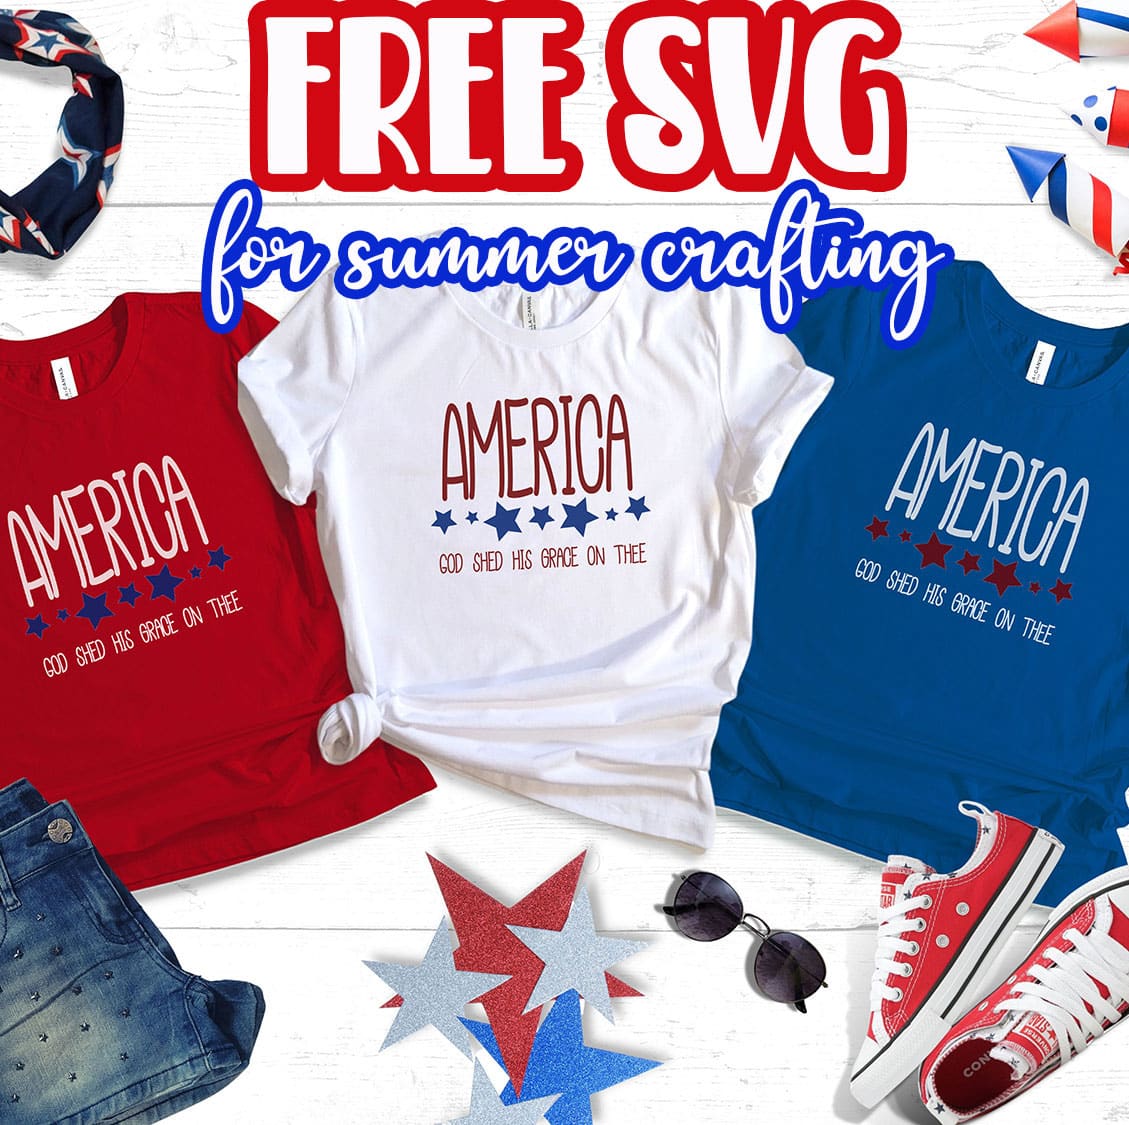 America - God Shed His grace on thee FREE SVG cut file and crafting inspiration